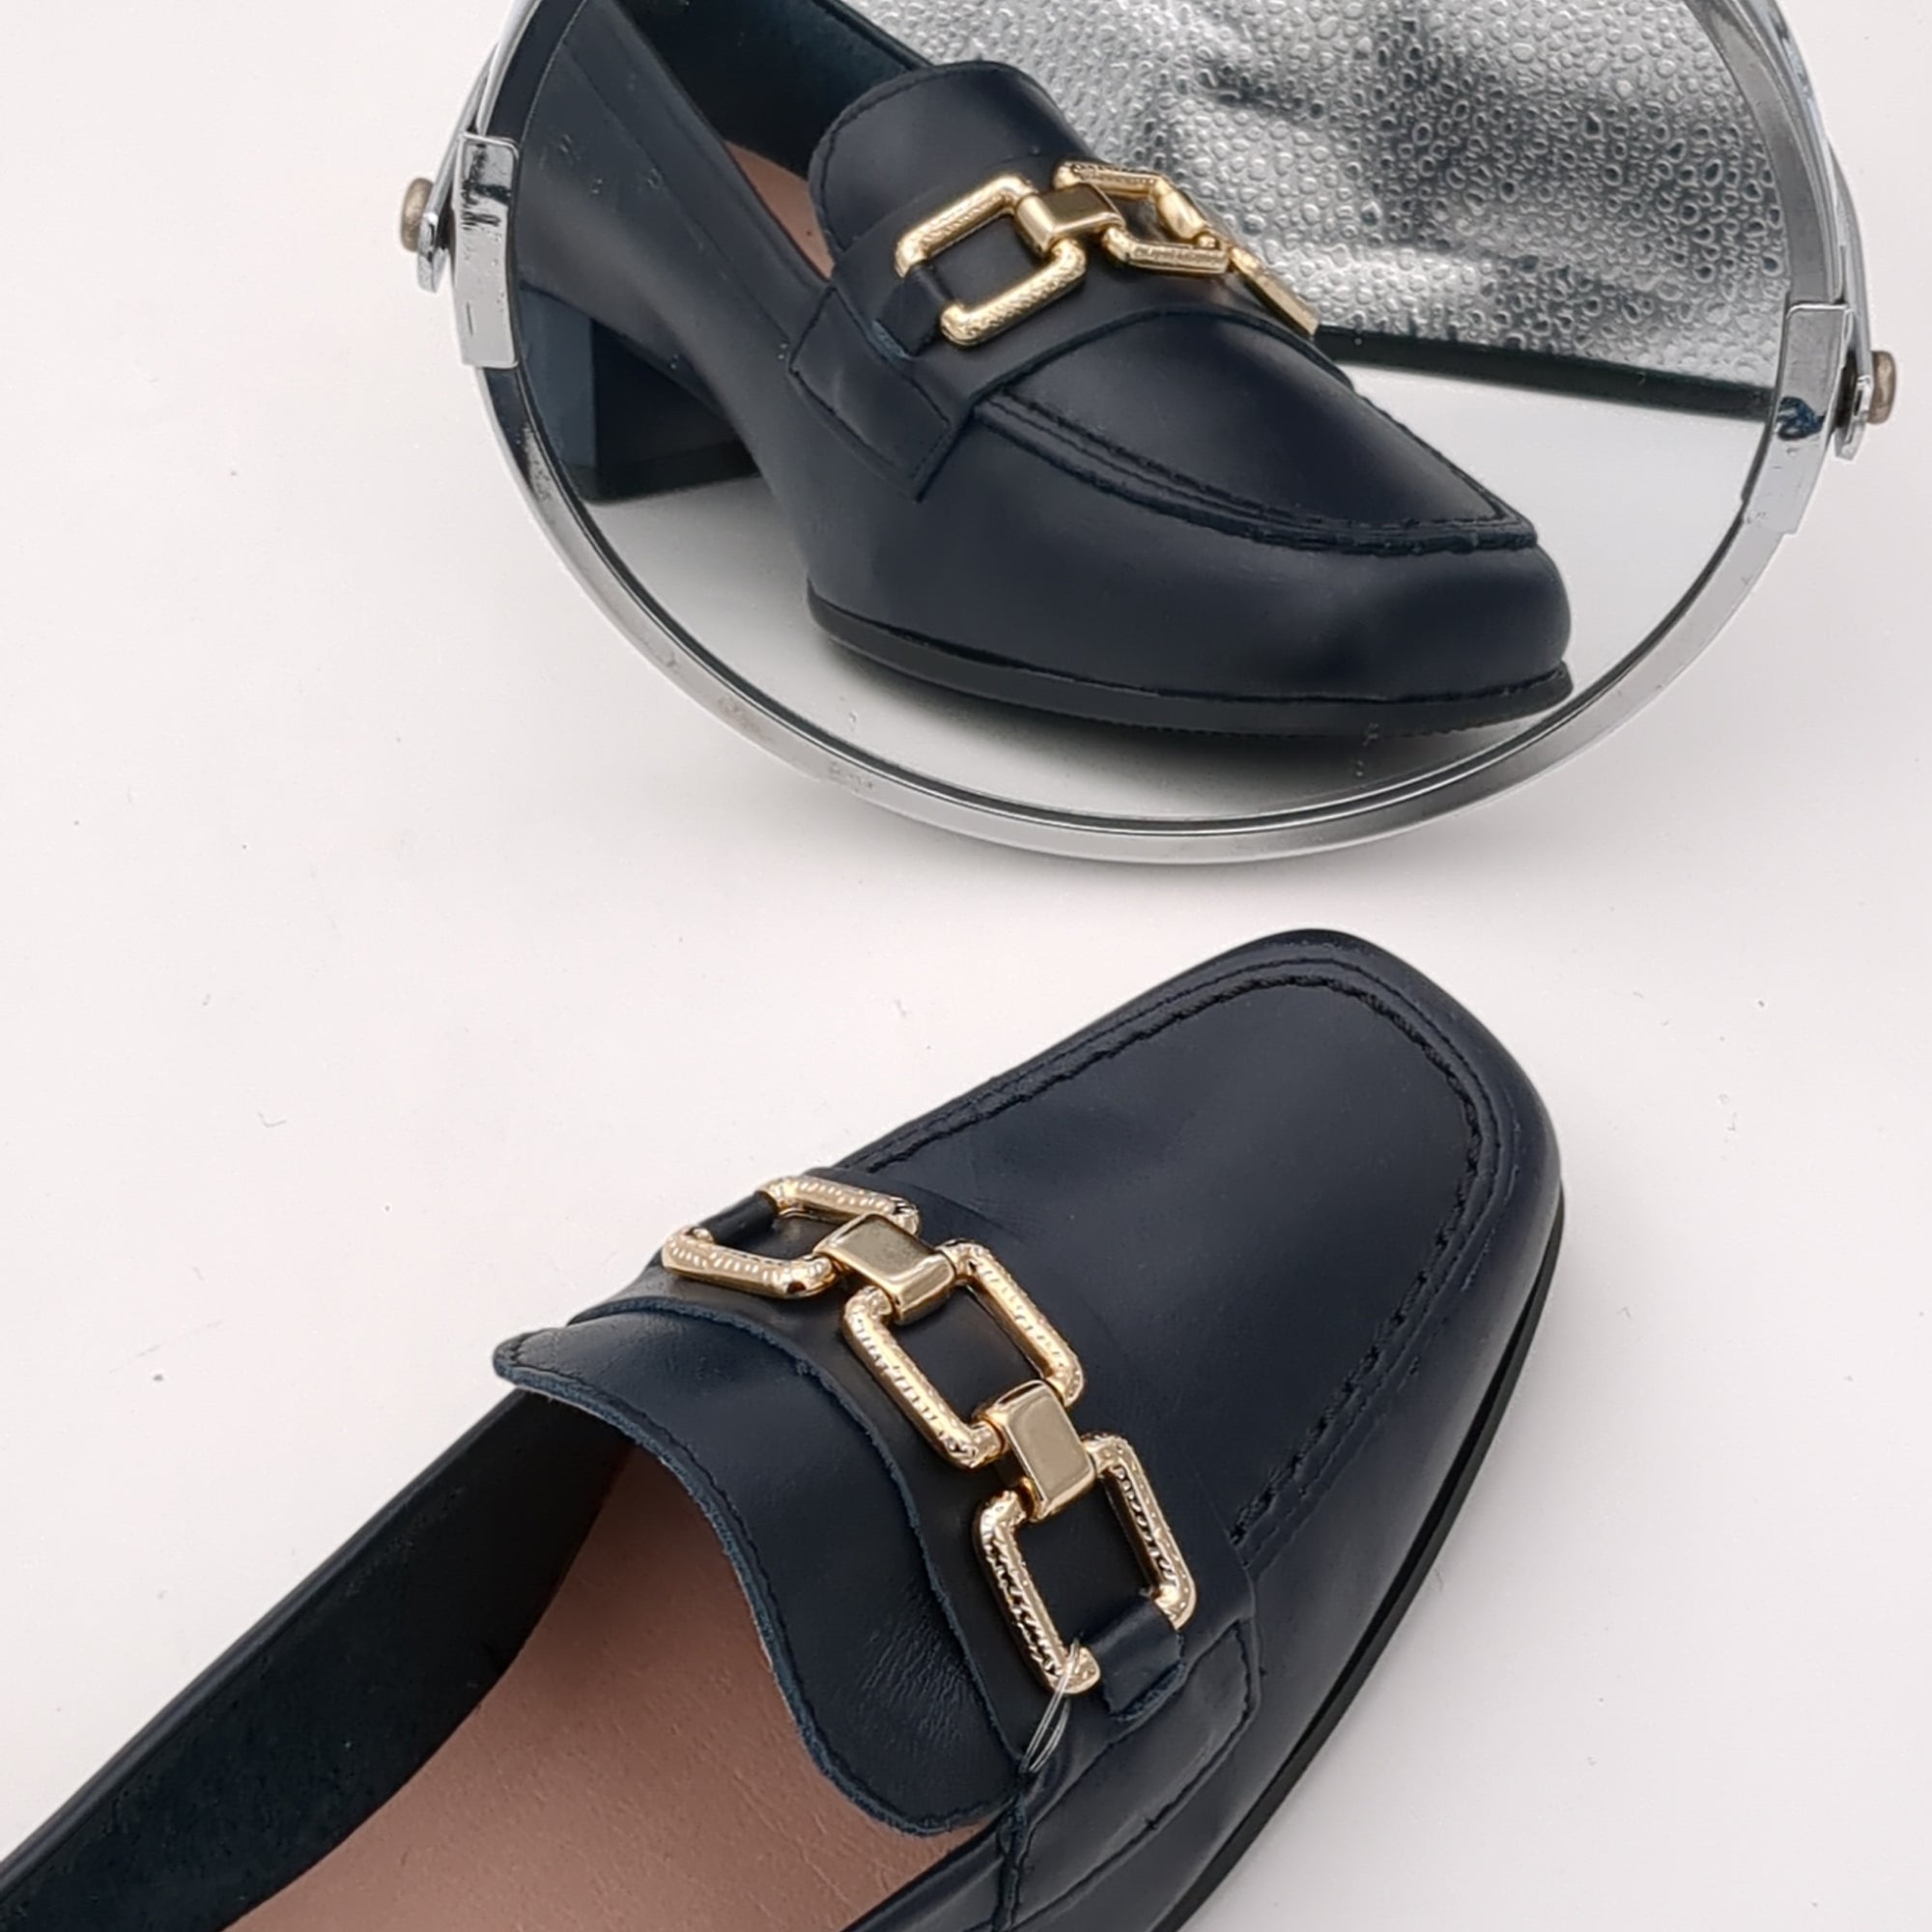 Pitillos Black Slip-on Loafers with Sleek Block Heel and Gold Chain